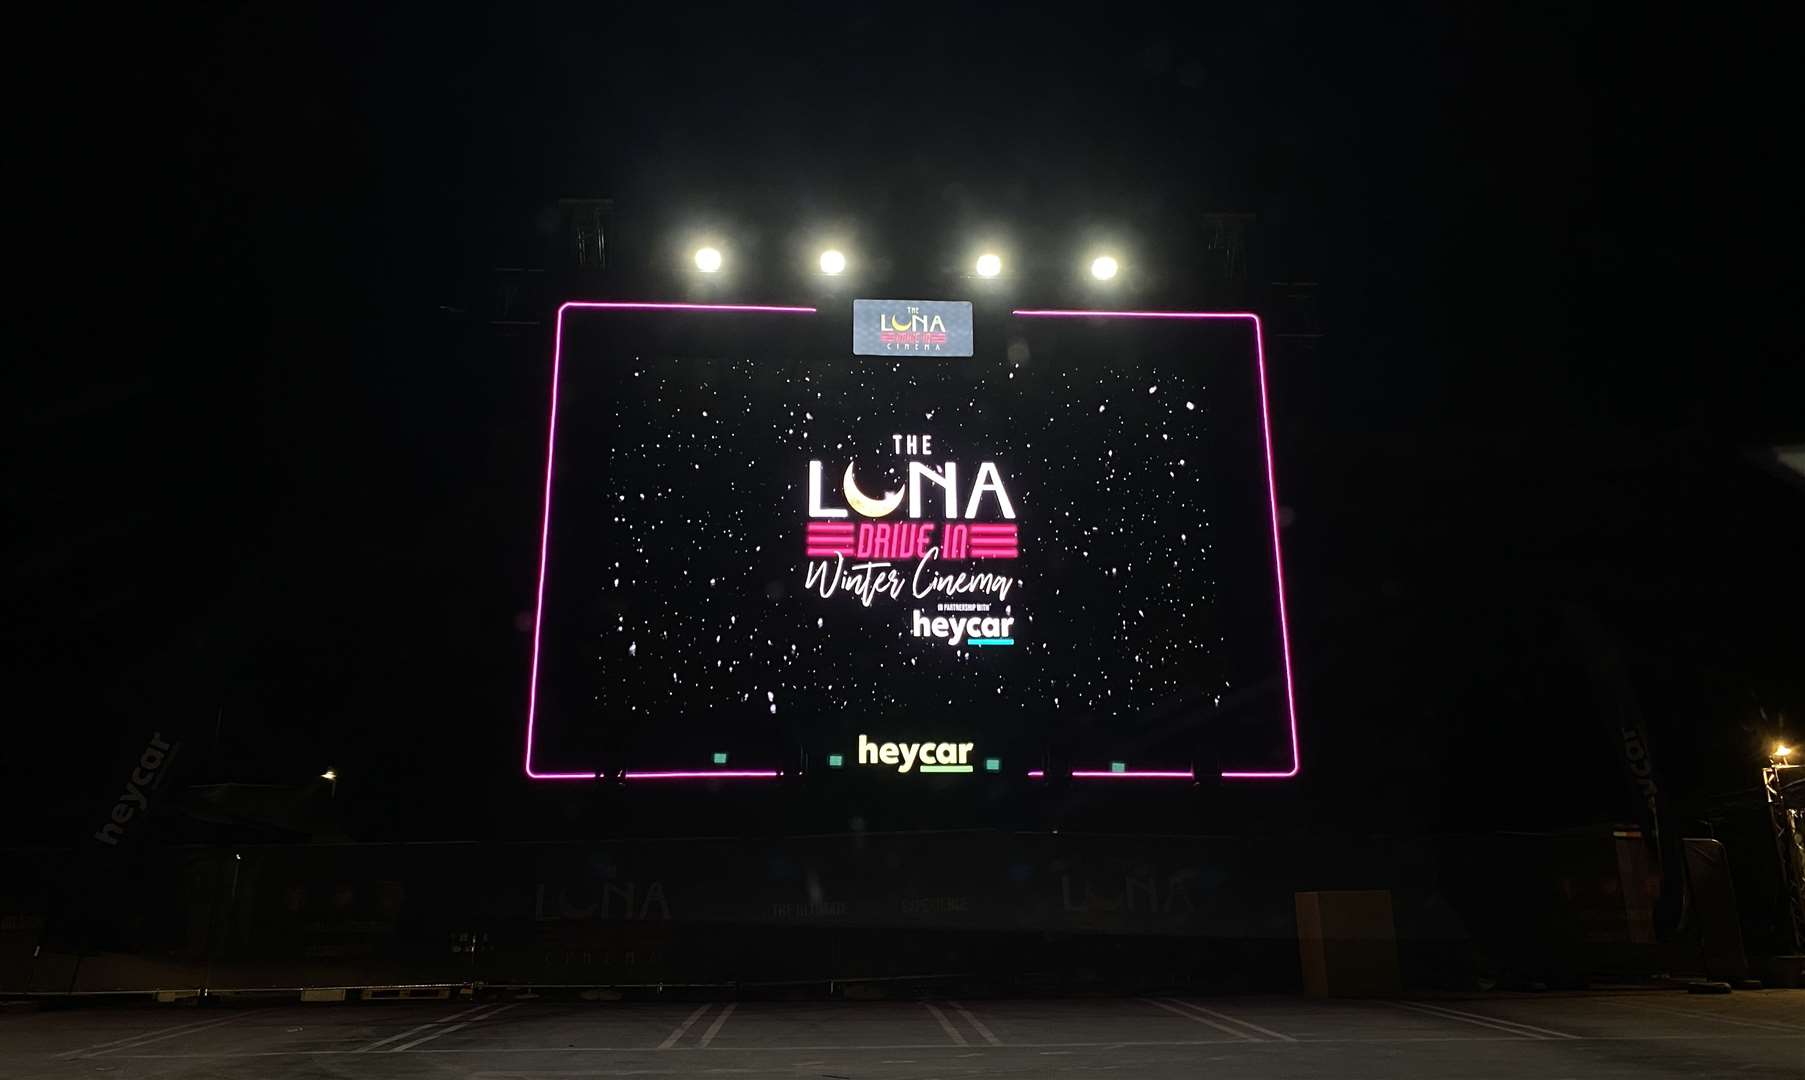 The Luna Drive-in Cinema is back for winter screenings at Bluewater